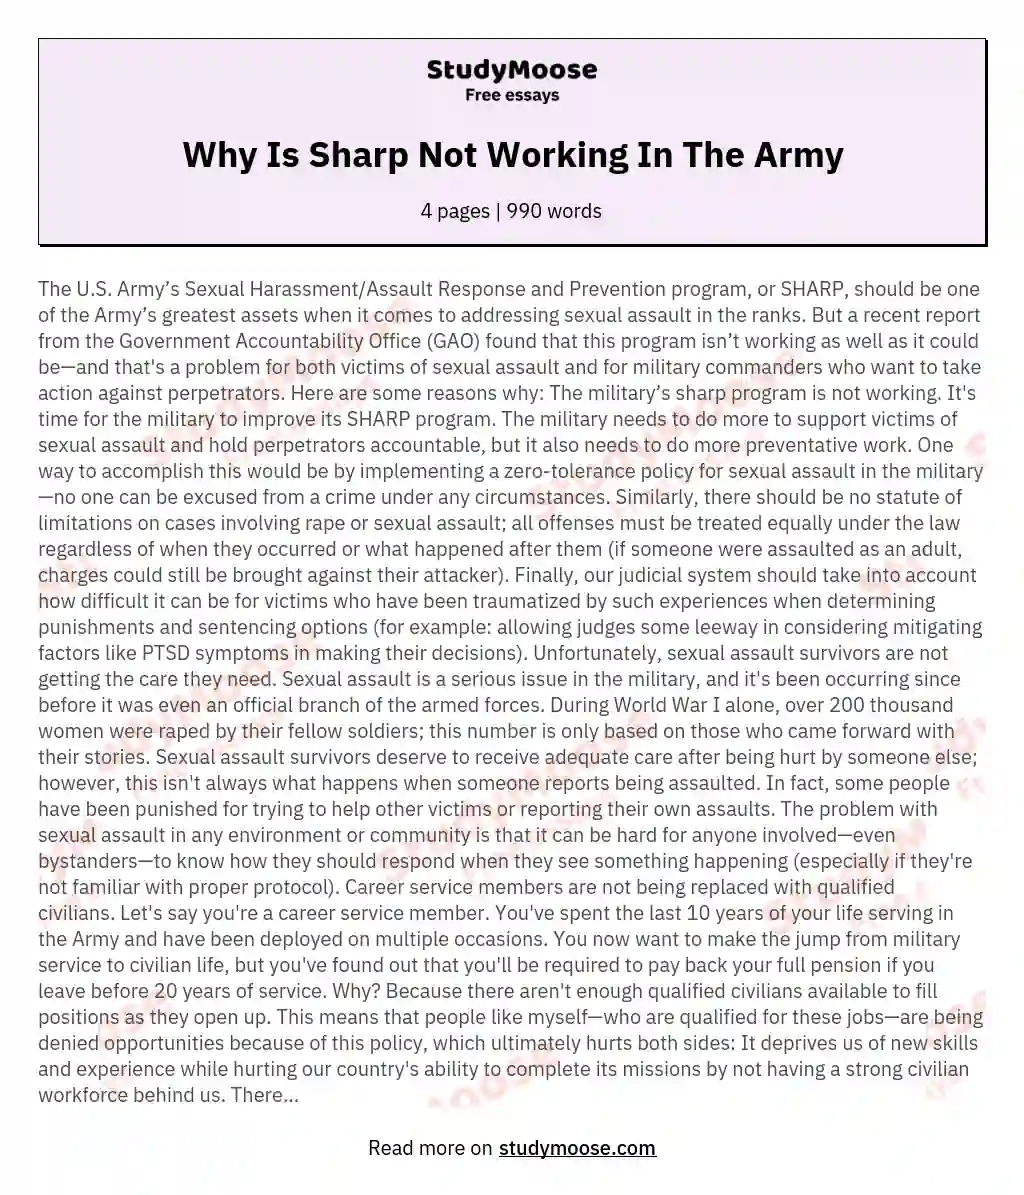 Why Is Sharp Not Working In The Army essay